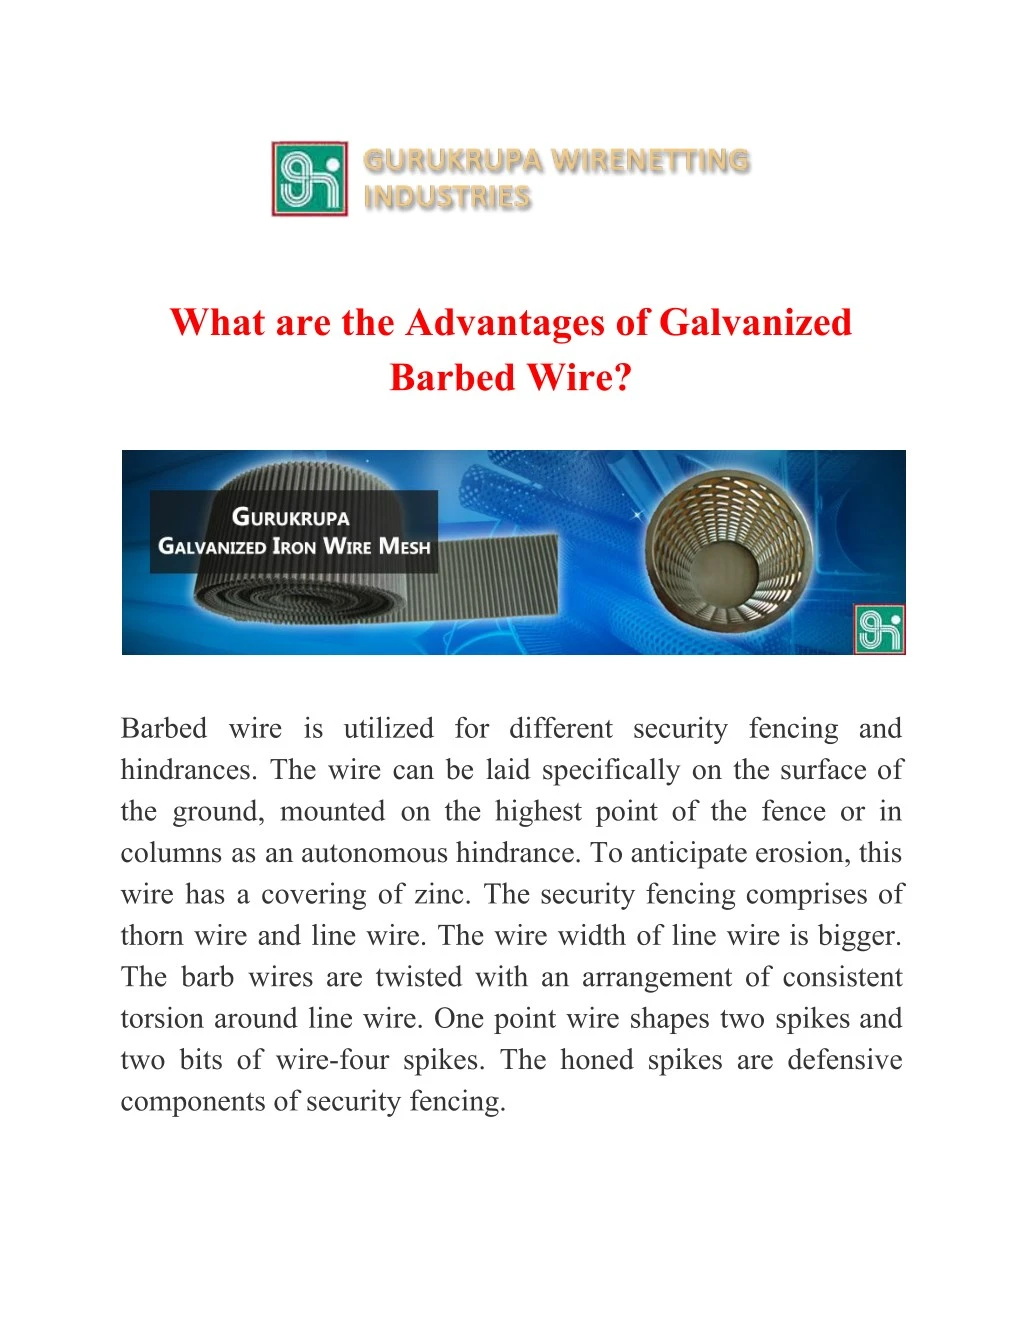 what are the advantages of galvanized barbed wire